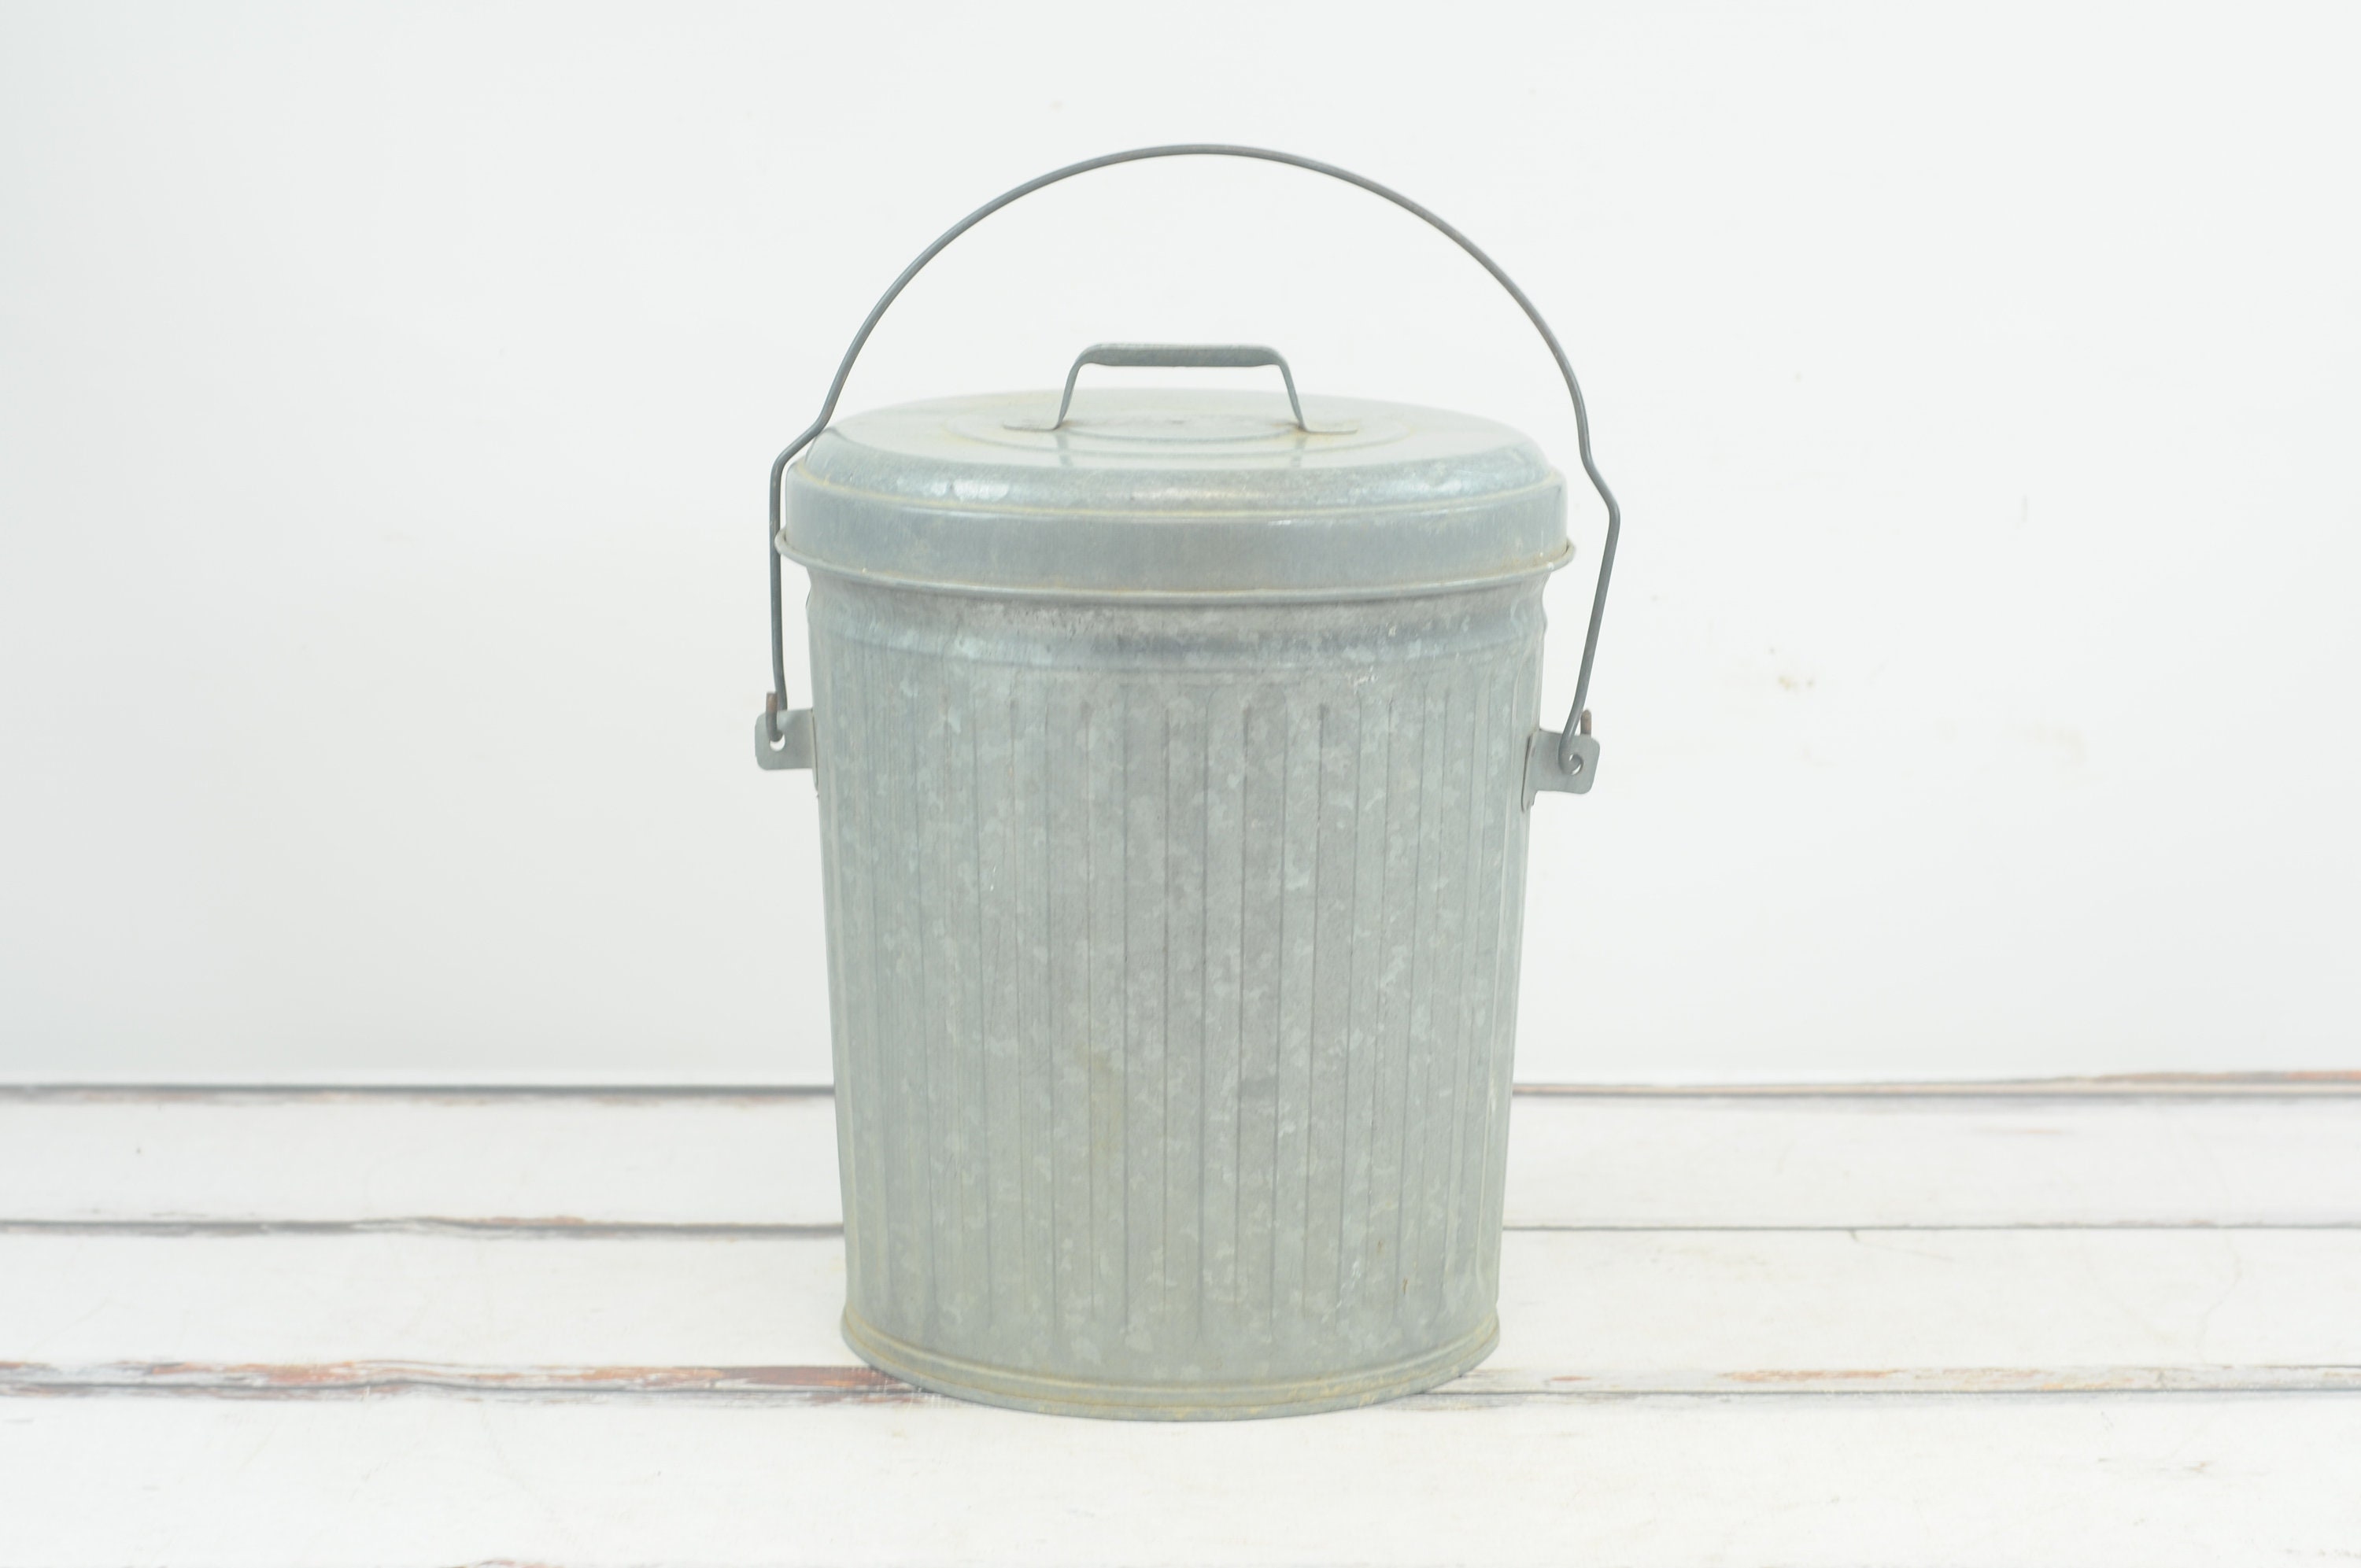 c. 1950's original pressed american industrial vintage steel roberts  electric company office stationary trash can or paper waste basket with  original baked on gray enameled finish